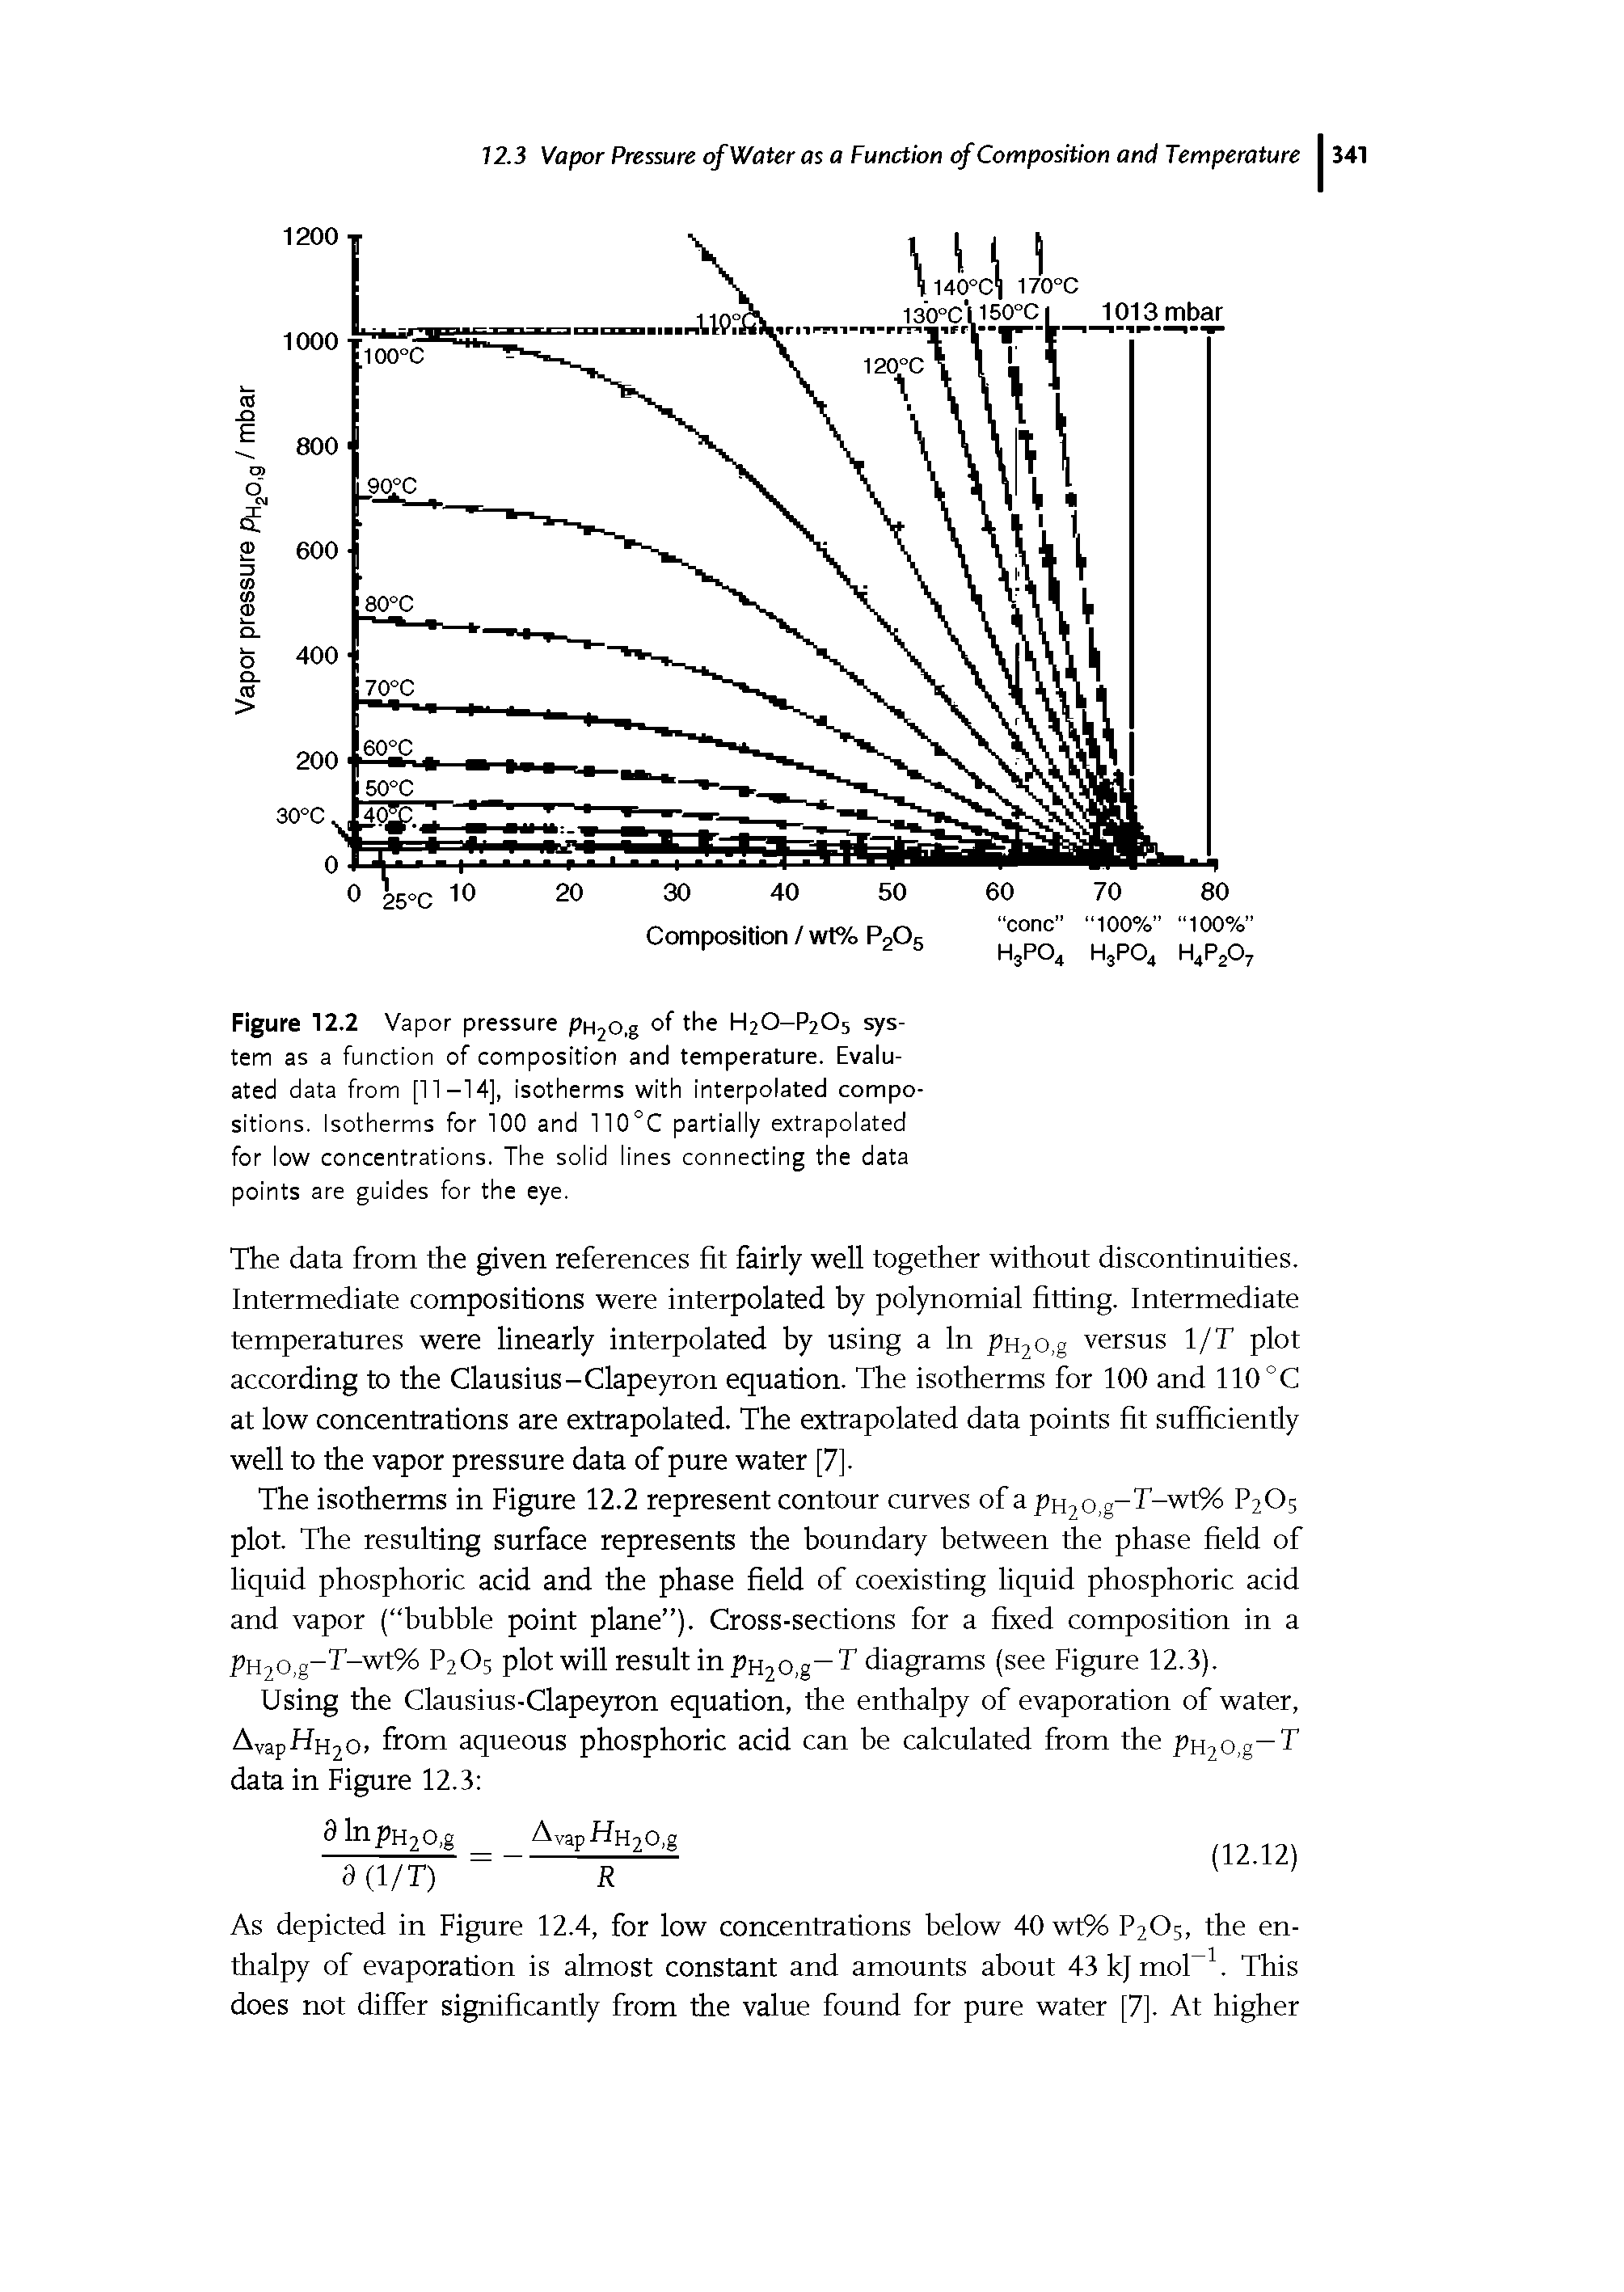 Figure 12.2 Vapor pressure pH20.g of the H2O-P2O5 system as a function of composition and temperature. Evaluated data from [11-14], isotherms with interpolated compositions. Isotherms for 100 and 110°C partially extrapolated for low concentrations. The solid lines connecting the data points are guides for the eye.